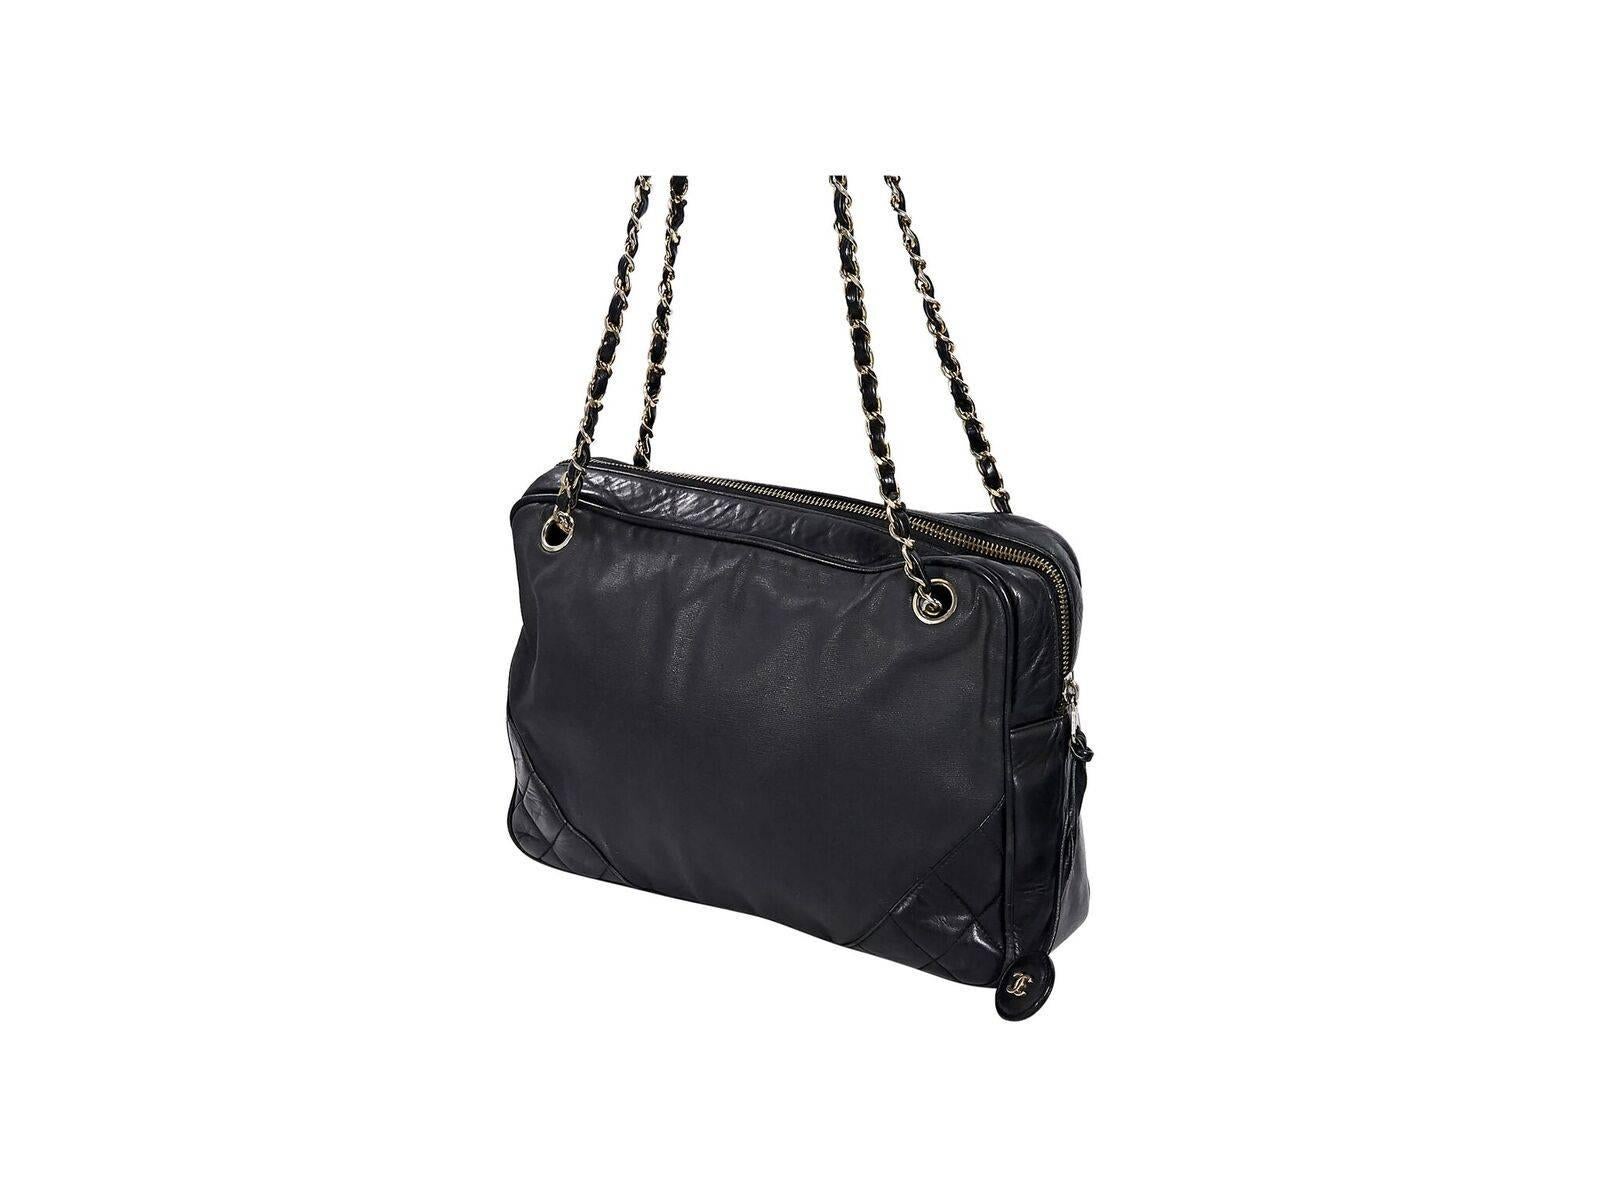 Product details:  Black leather shoulder bag by Chanel.  Accented with quilted corners.  Dual chain and leather shoulder straps.  Top zip closure.  Leather interior with inner slide and zip pockets.  Front exterior slide pocket.  Goldtone hardware. 